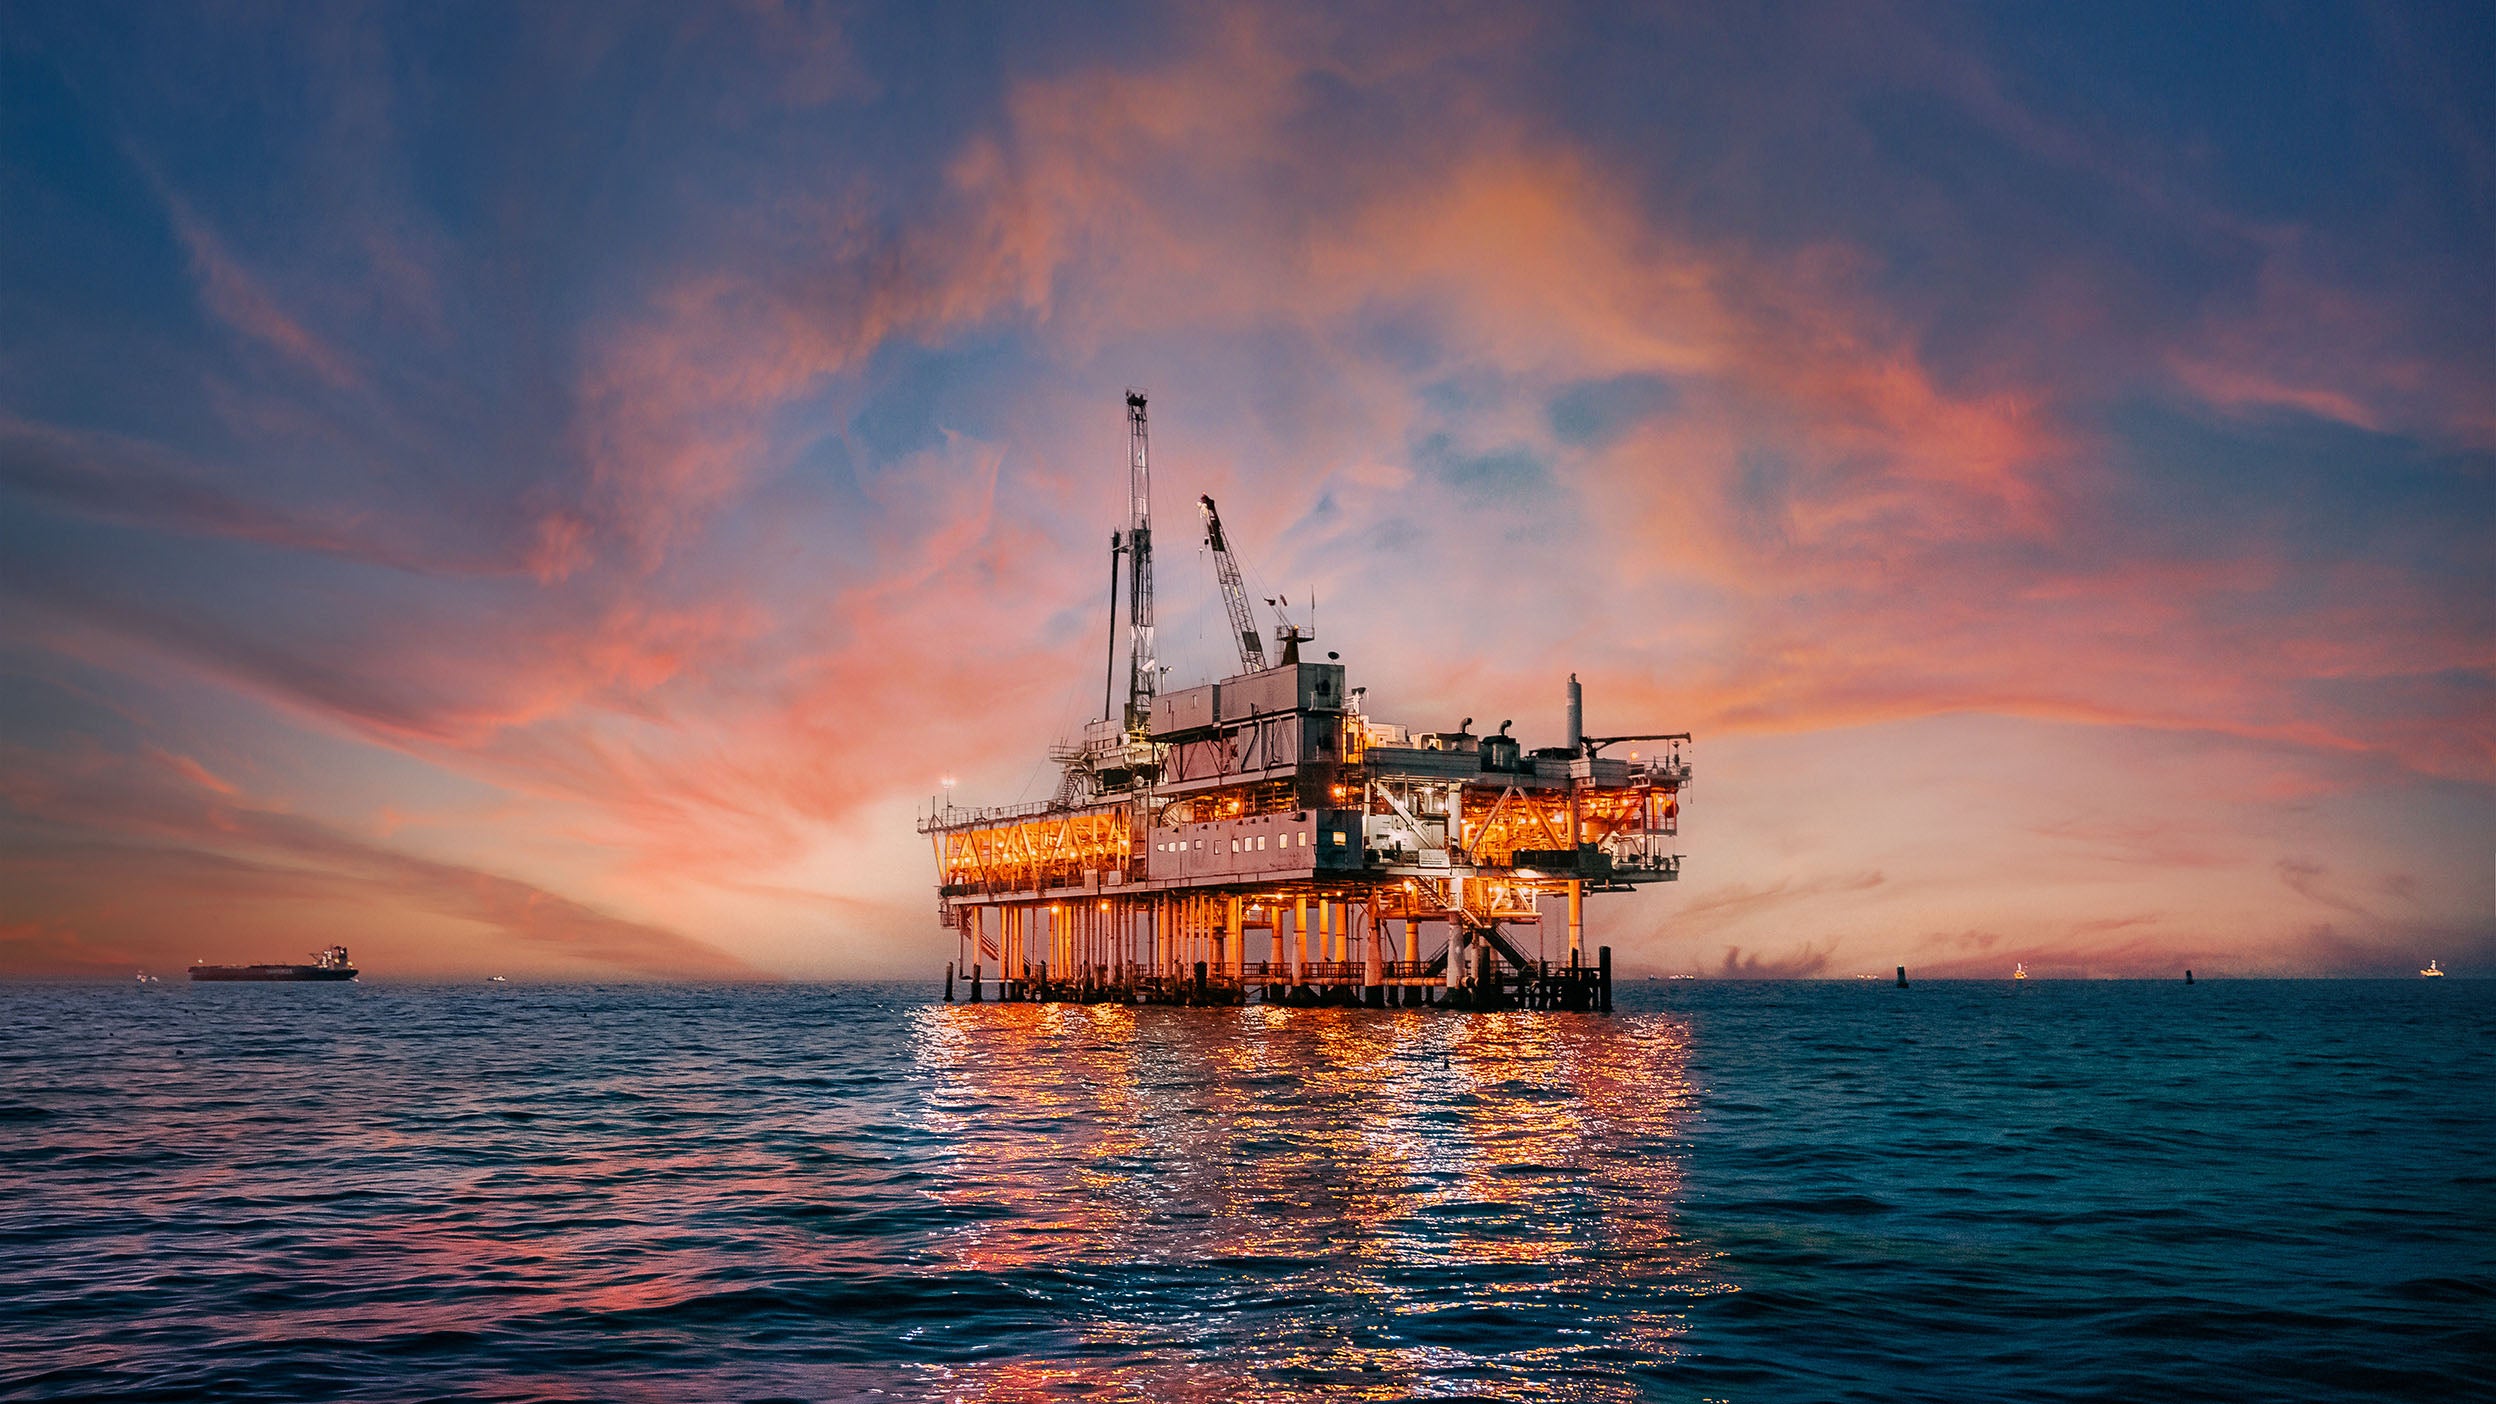 Sunset sky behind an offshore oil drilling rig off the coast of Orange County, California